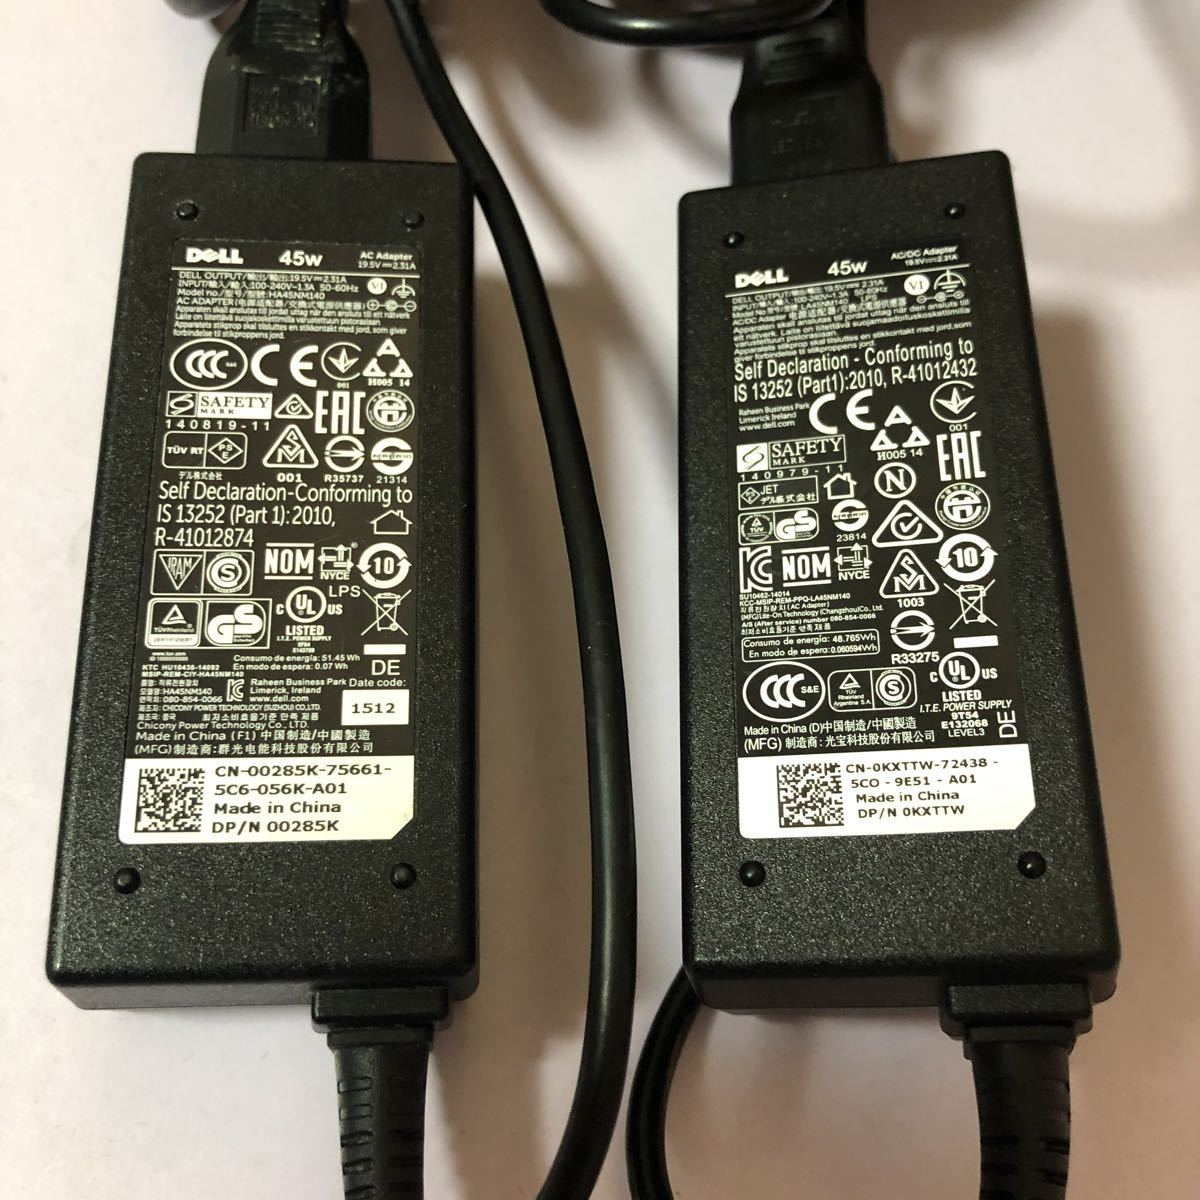  used DELL 45W AC ADAPTER LA45NM140,HA45NM140 19.5V~2.31A inspiron 15 5000/13 5000/13 7000/xps 13/Vostro 15 3000 operation guarantee operation goods 